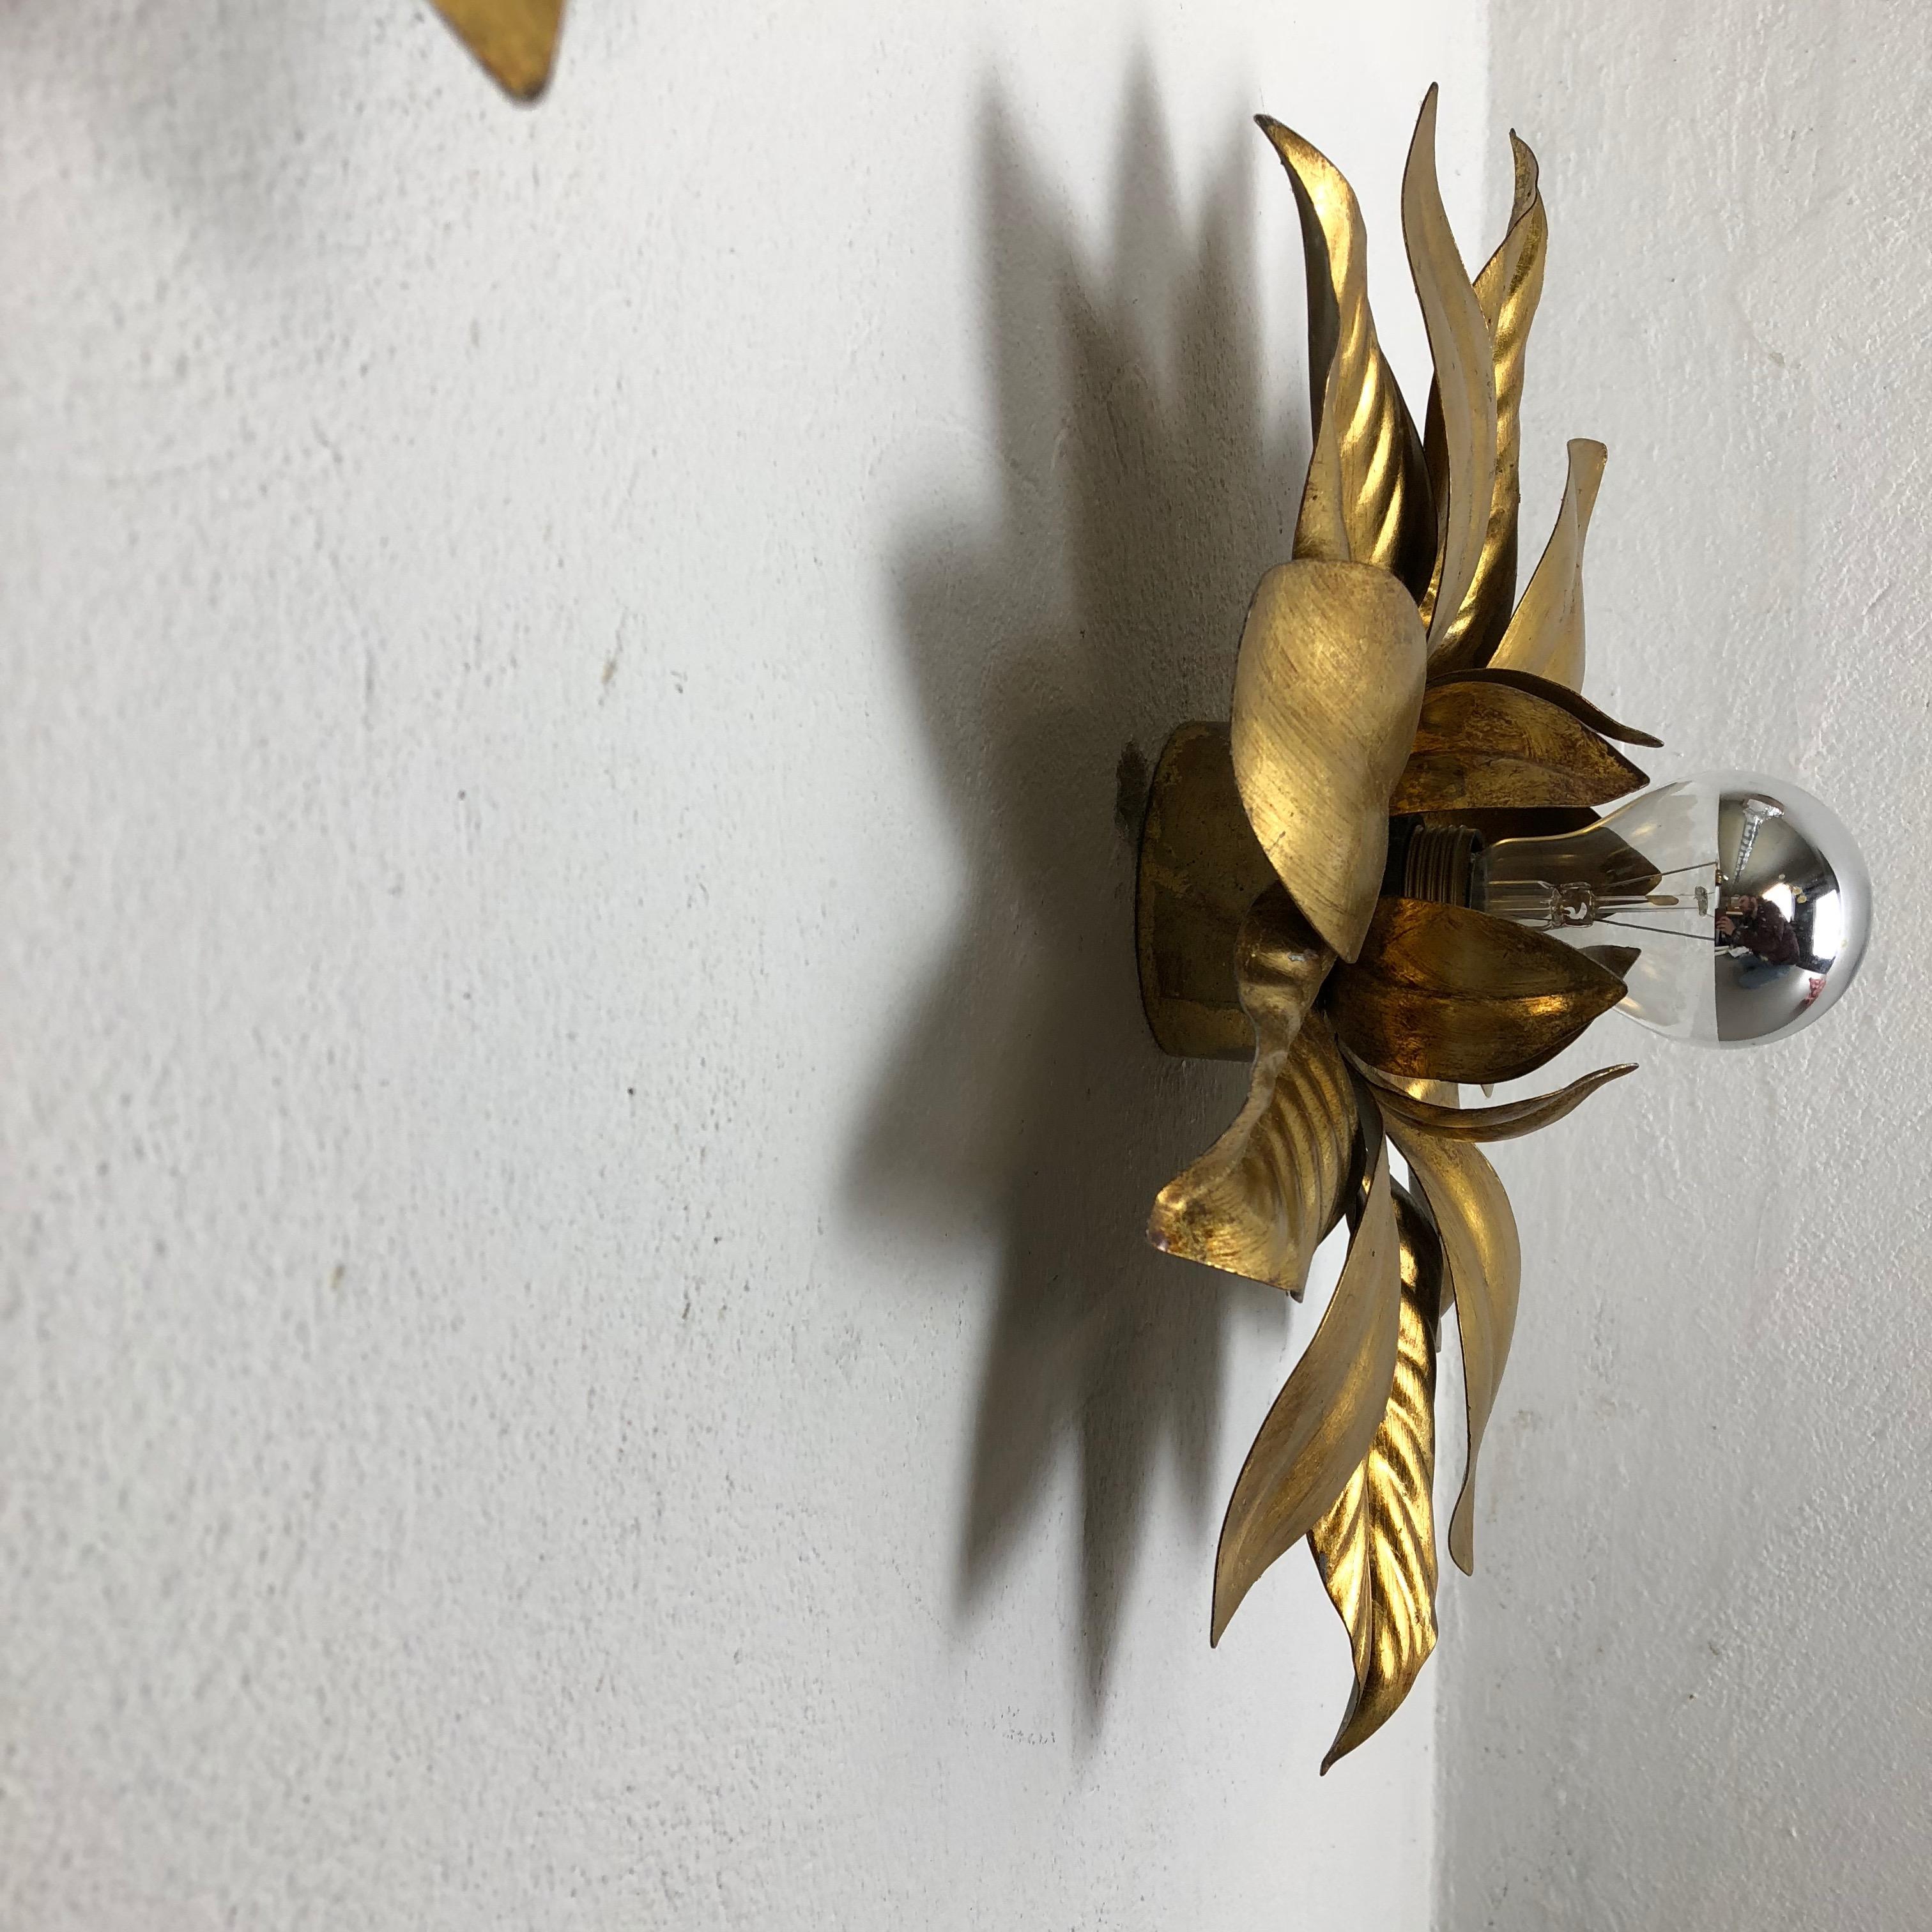 Set of 3 Golden Florentiner Leaf Theatre Wall Ceiling Light Sconces, Italy 1960s 11